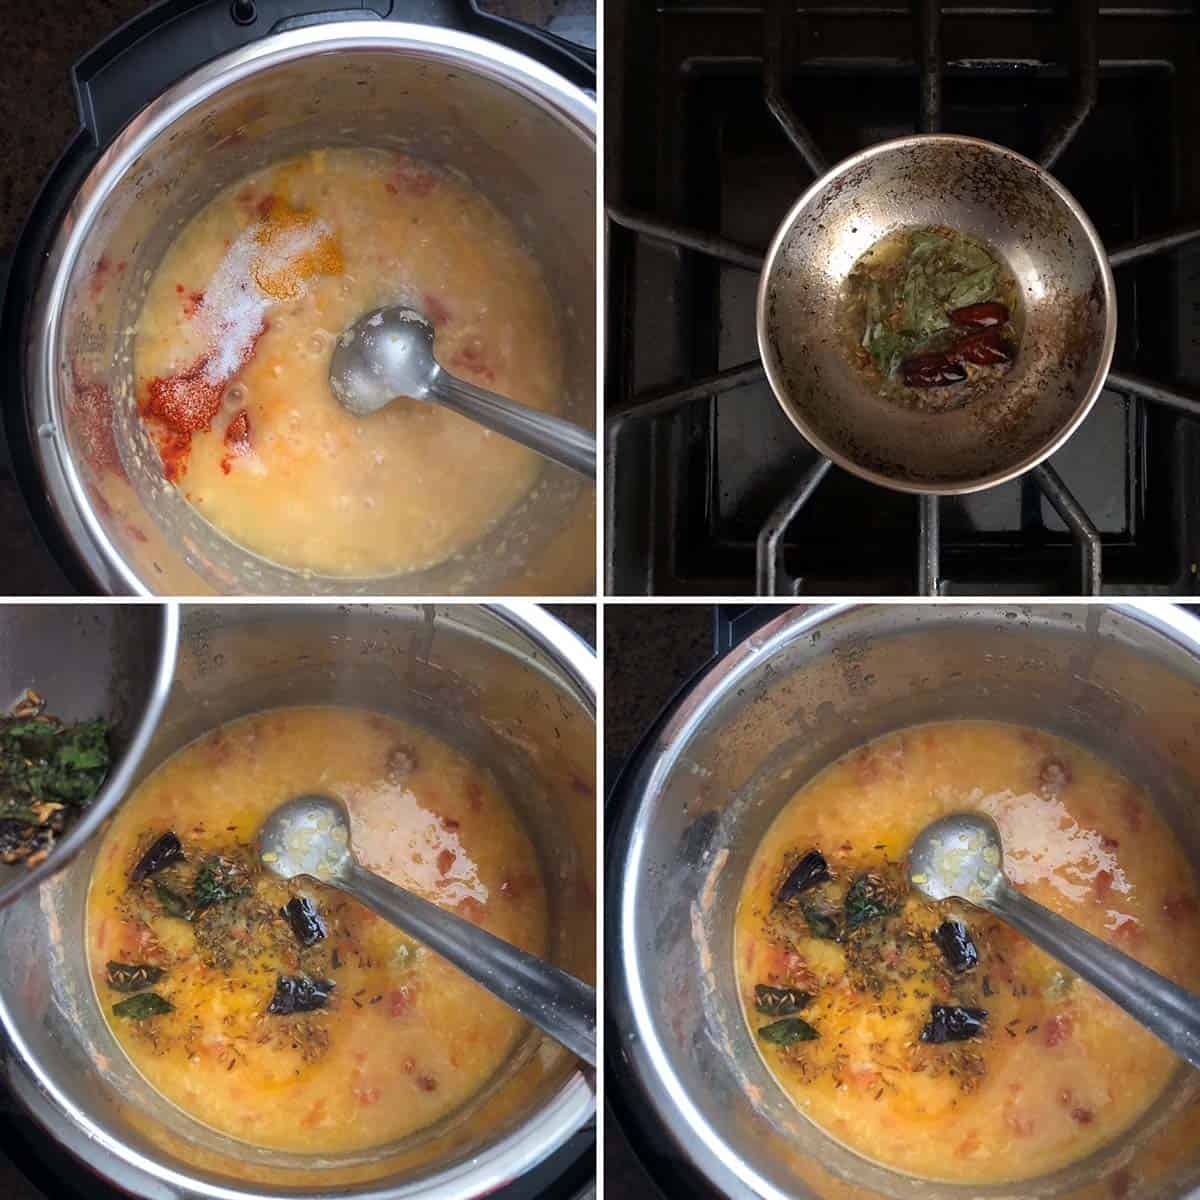 Step by step photos showing cooking of moong dal